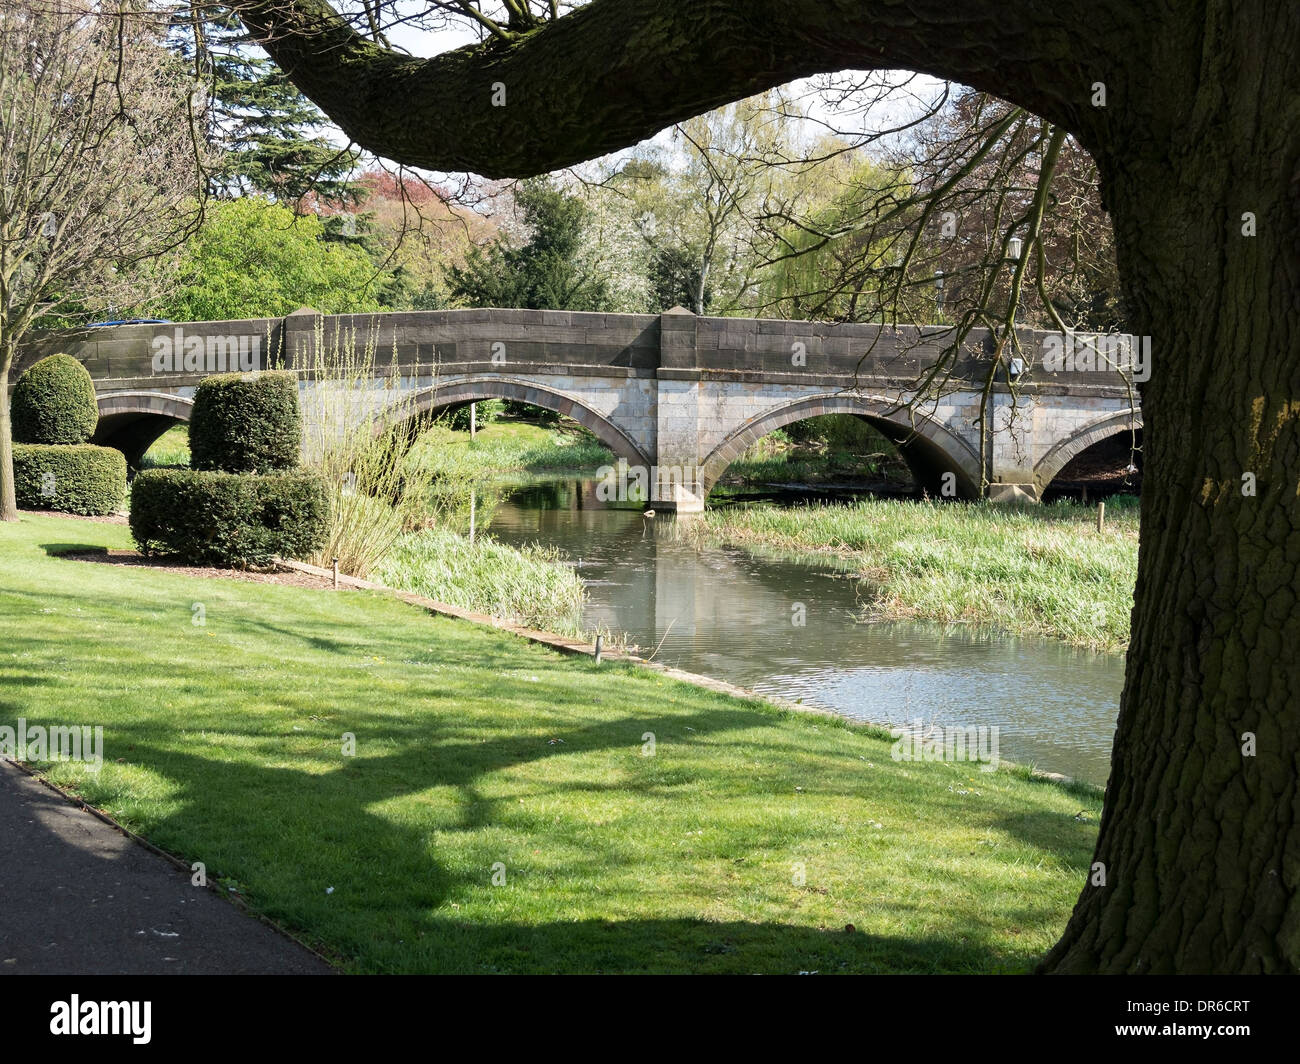 The stone arches of Lady Wilton Bridge over the River Eye with Egerton Lodge Gardens in the foreground, Melton Mowbray. Stock Photo